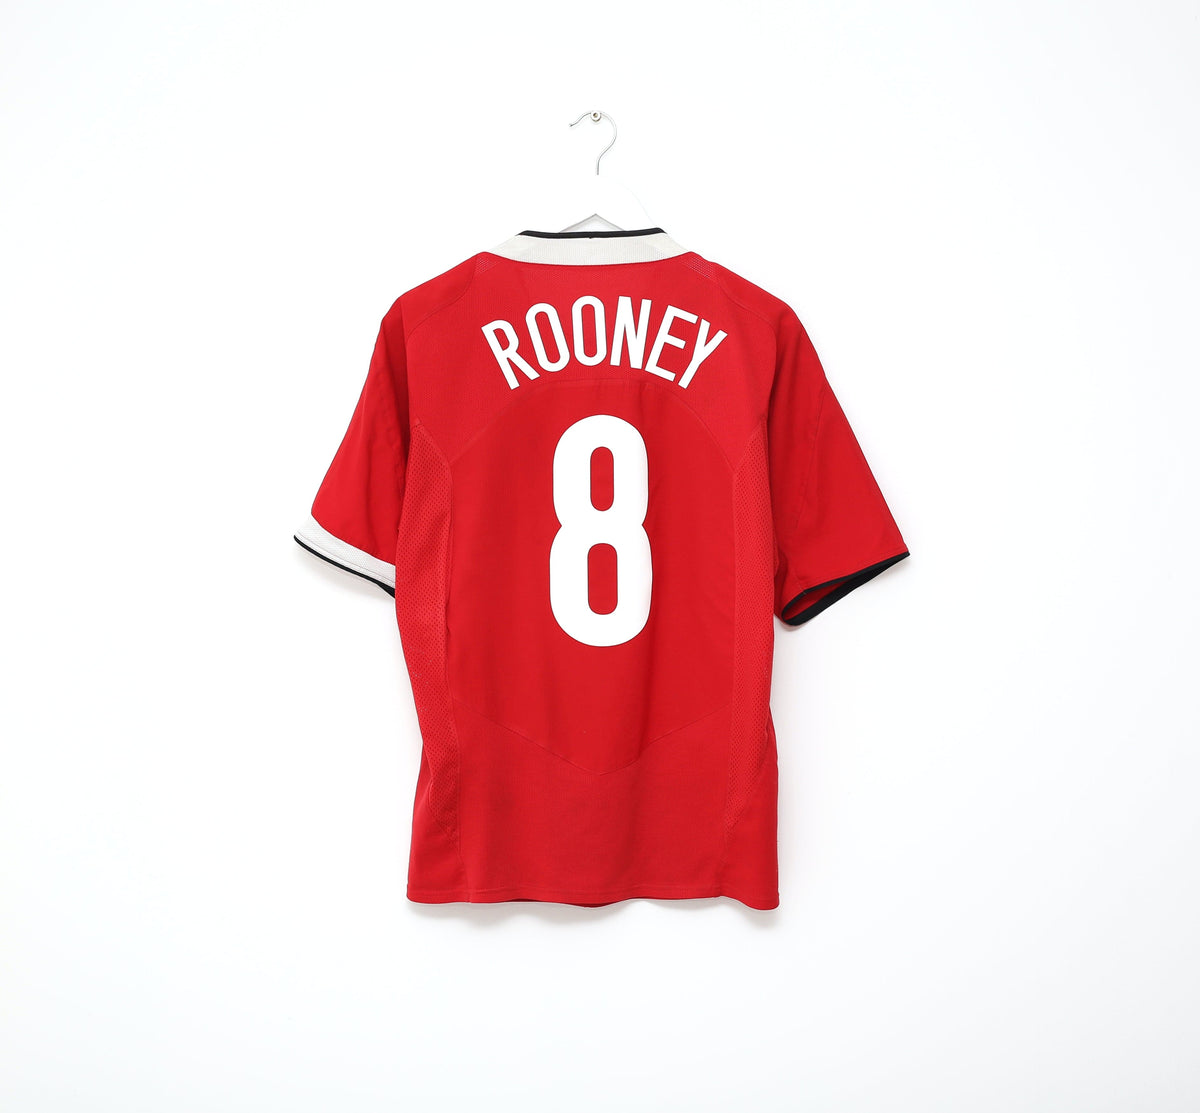 2004/06 ROONEY #8 Manchester United Vintage Nike UCL Home Football Shirt (L)